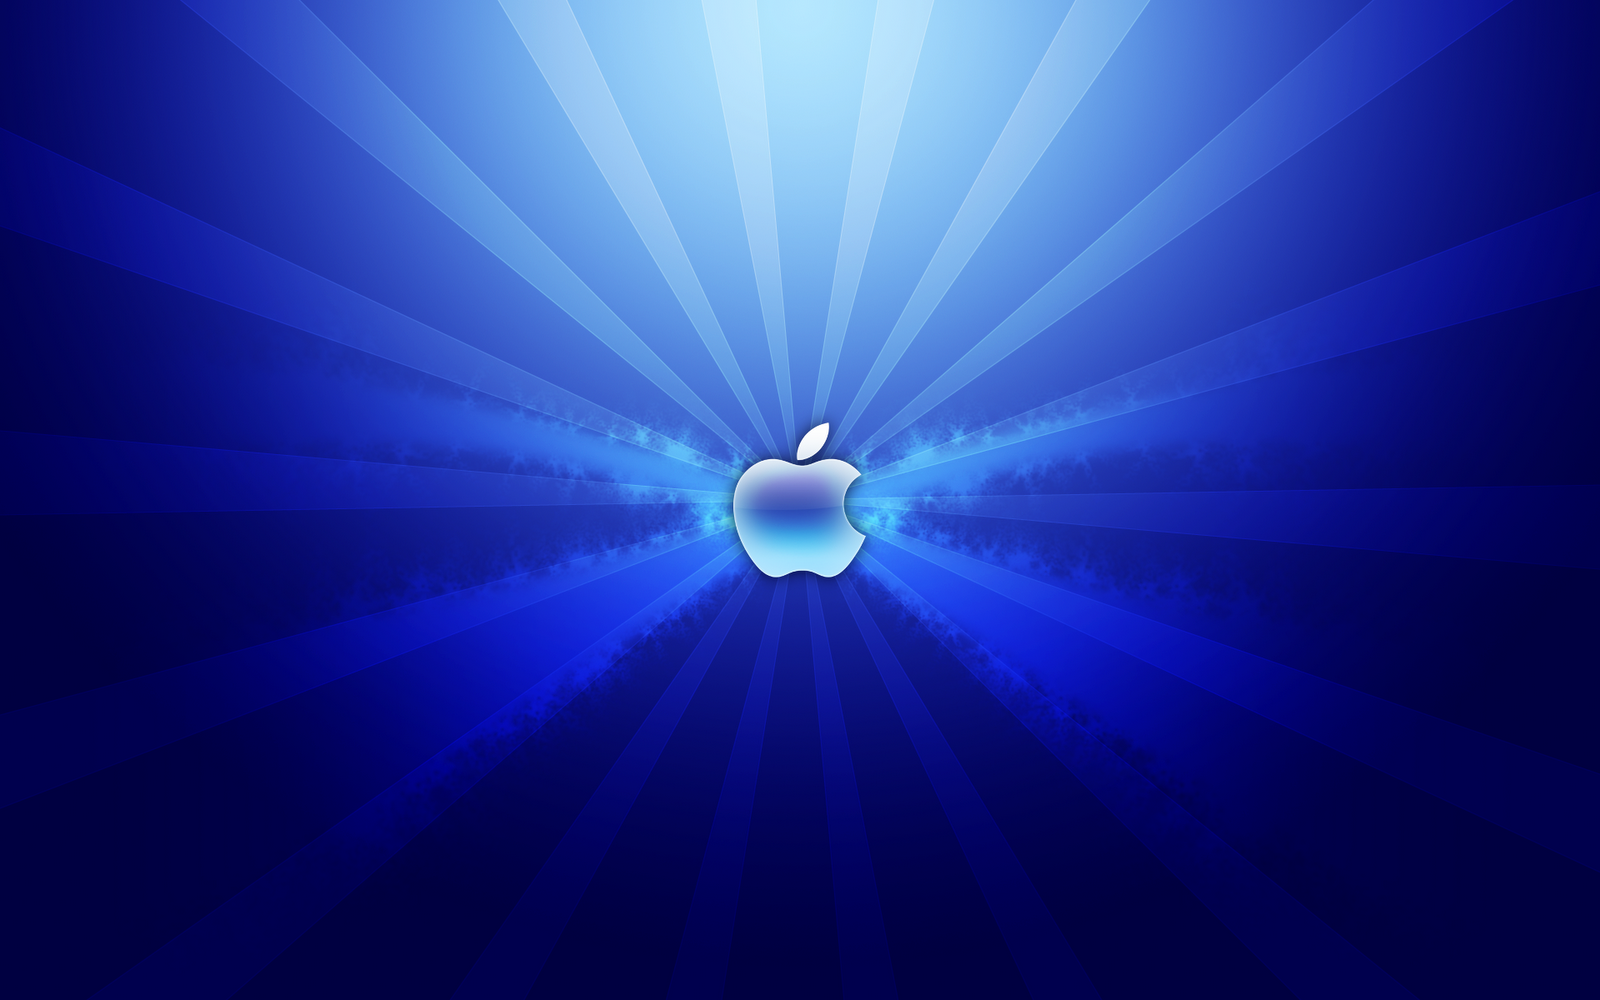 Blue Apple Laptop Wallpaper here you can see Light Blue Apple Laptop